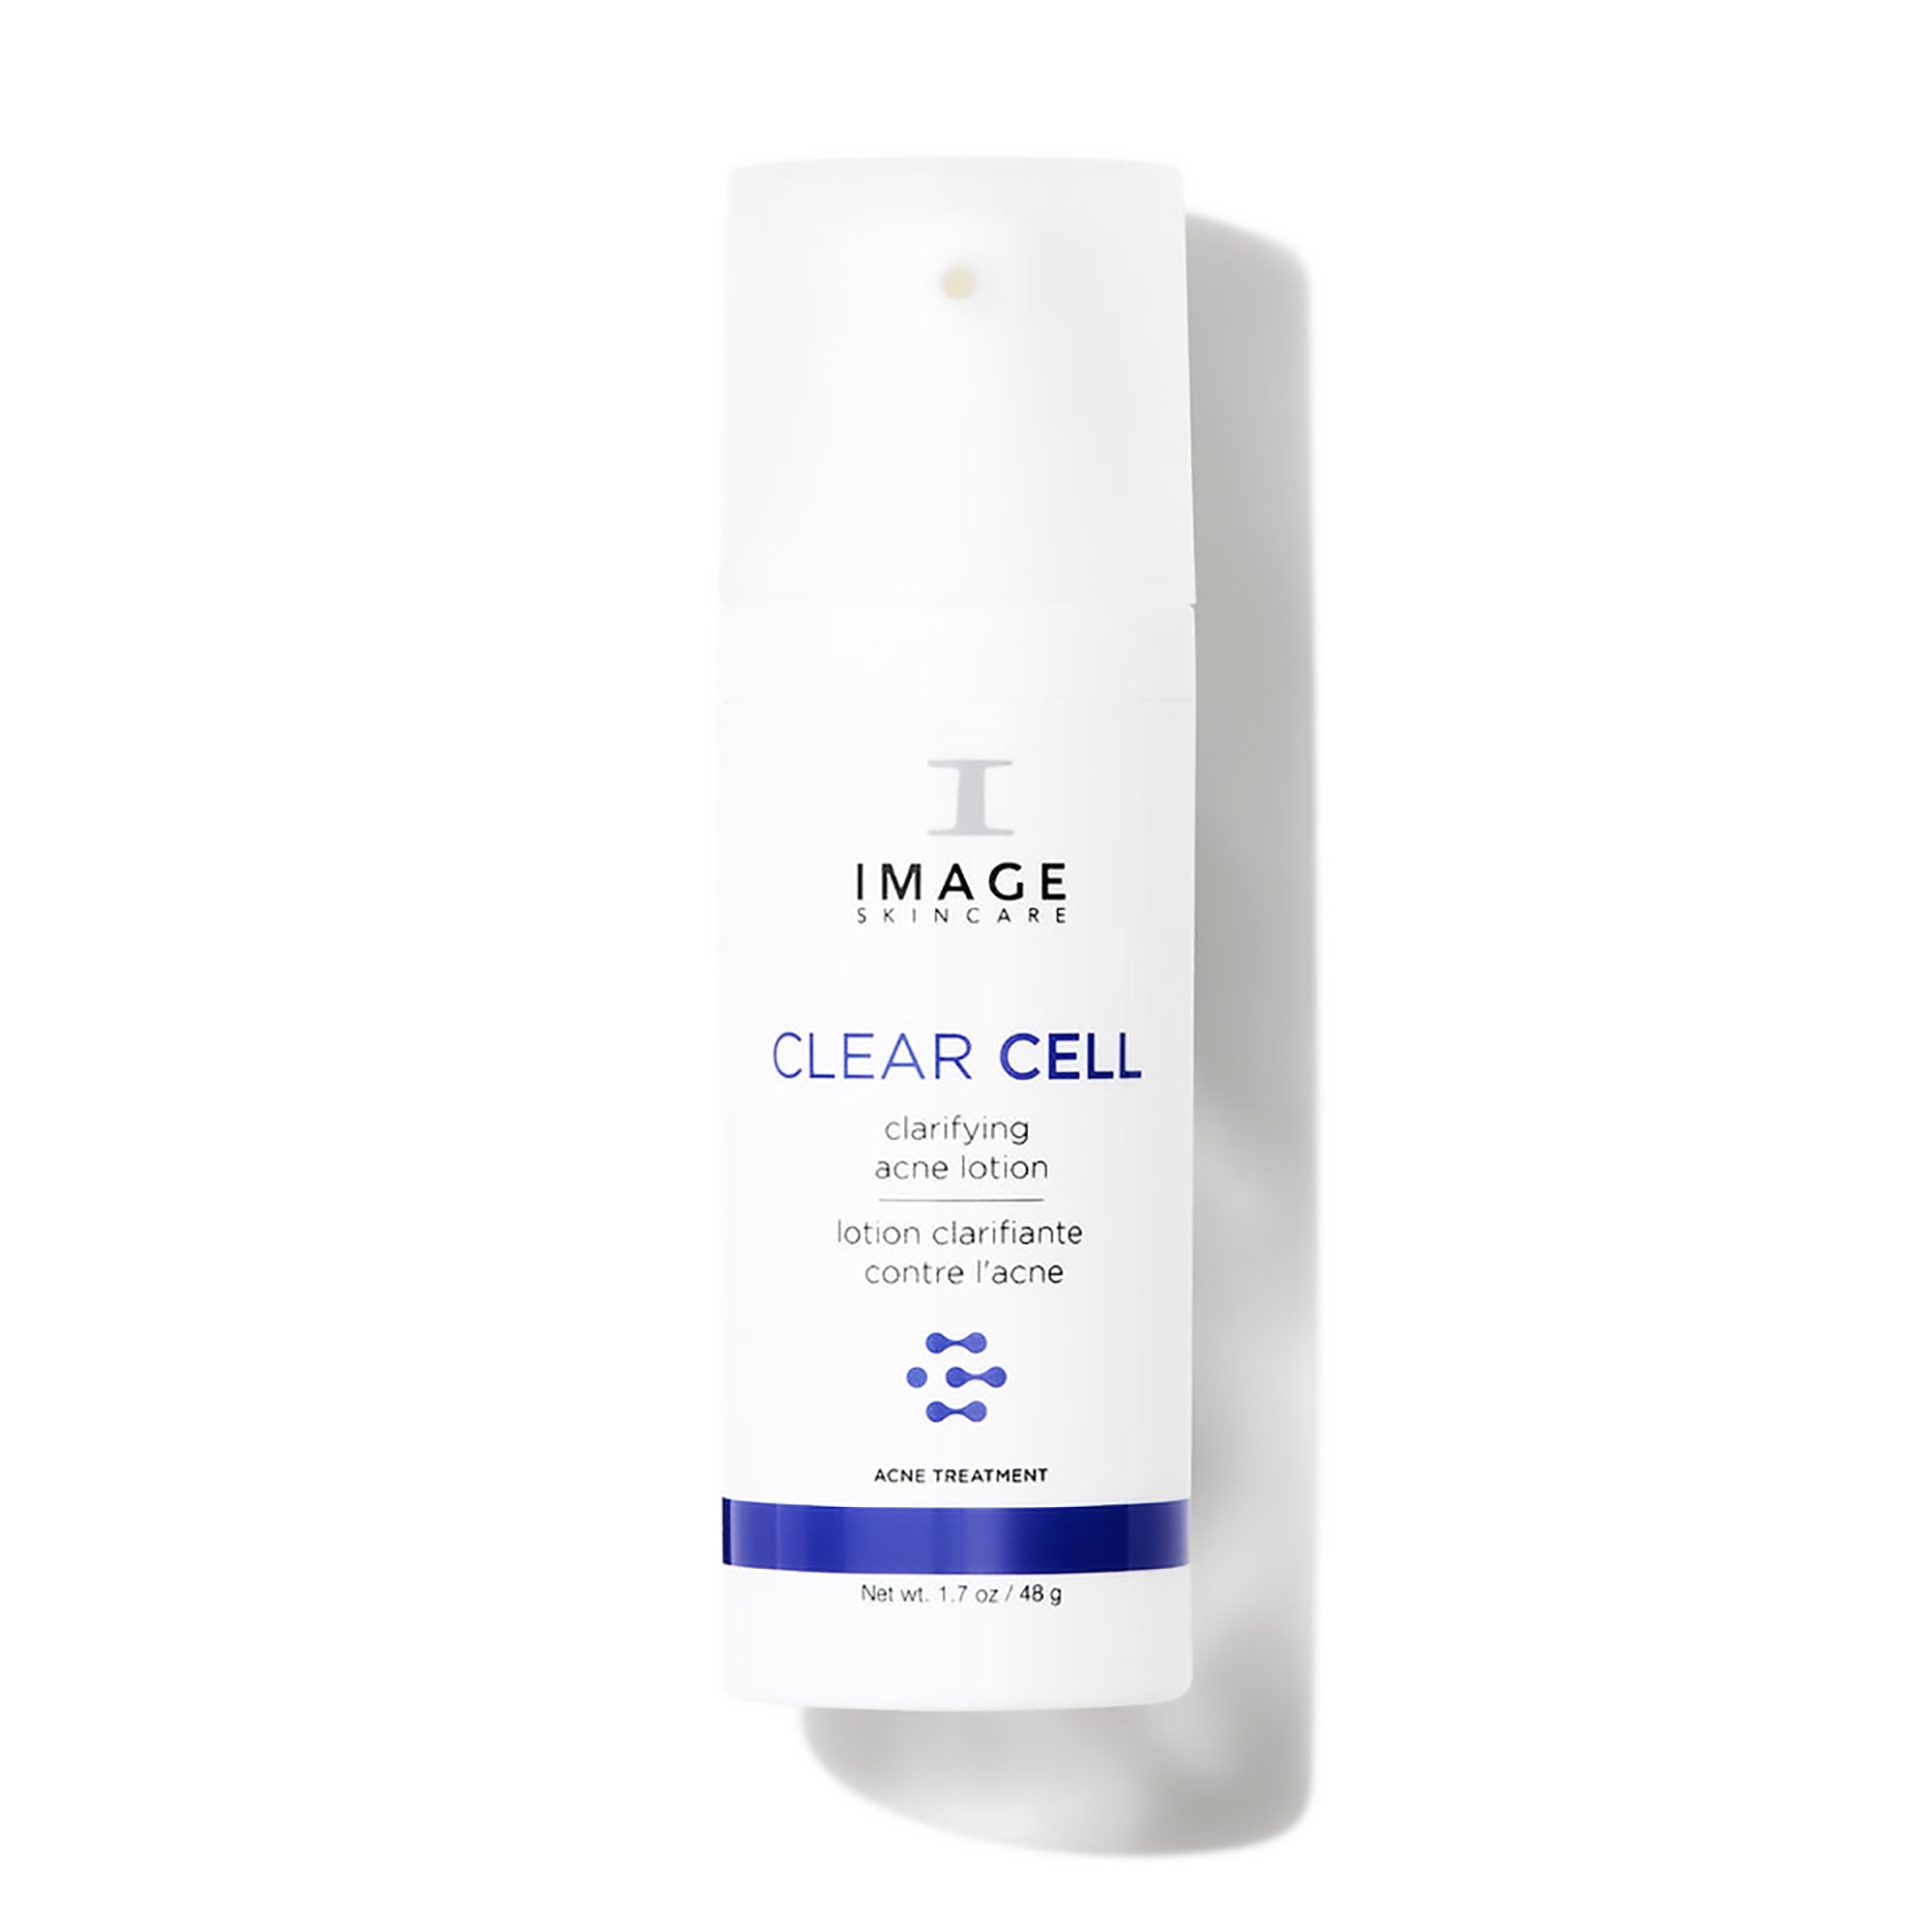 Image Skincare Clear Cell Clarifying Acne Lotion / 1.7OZ